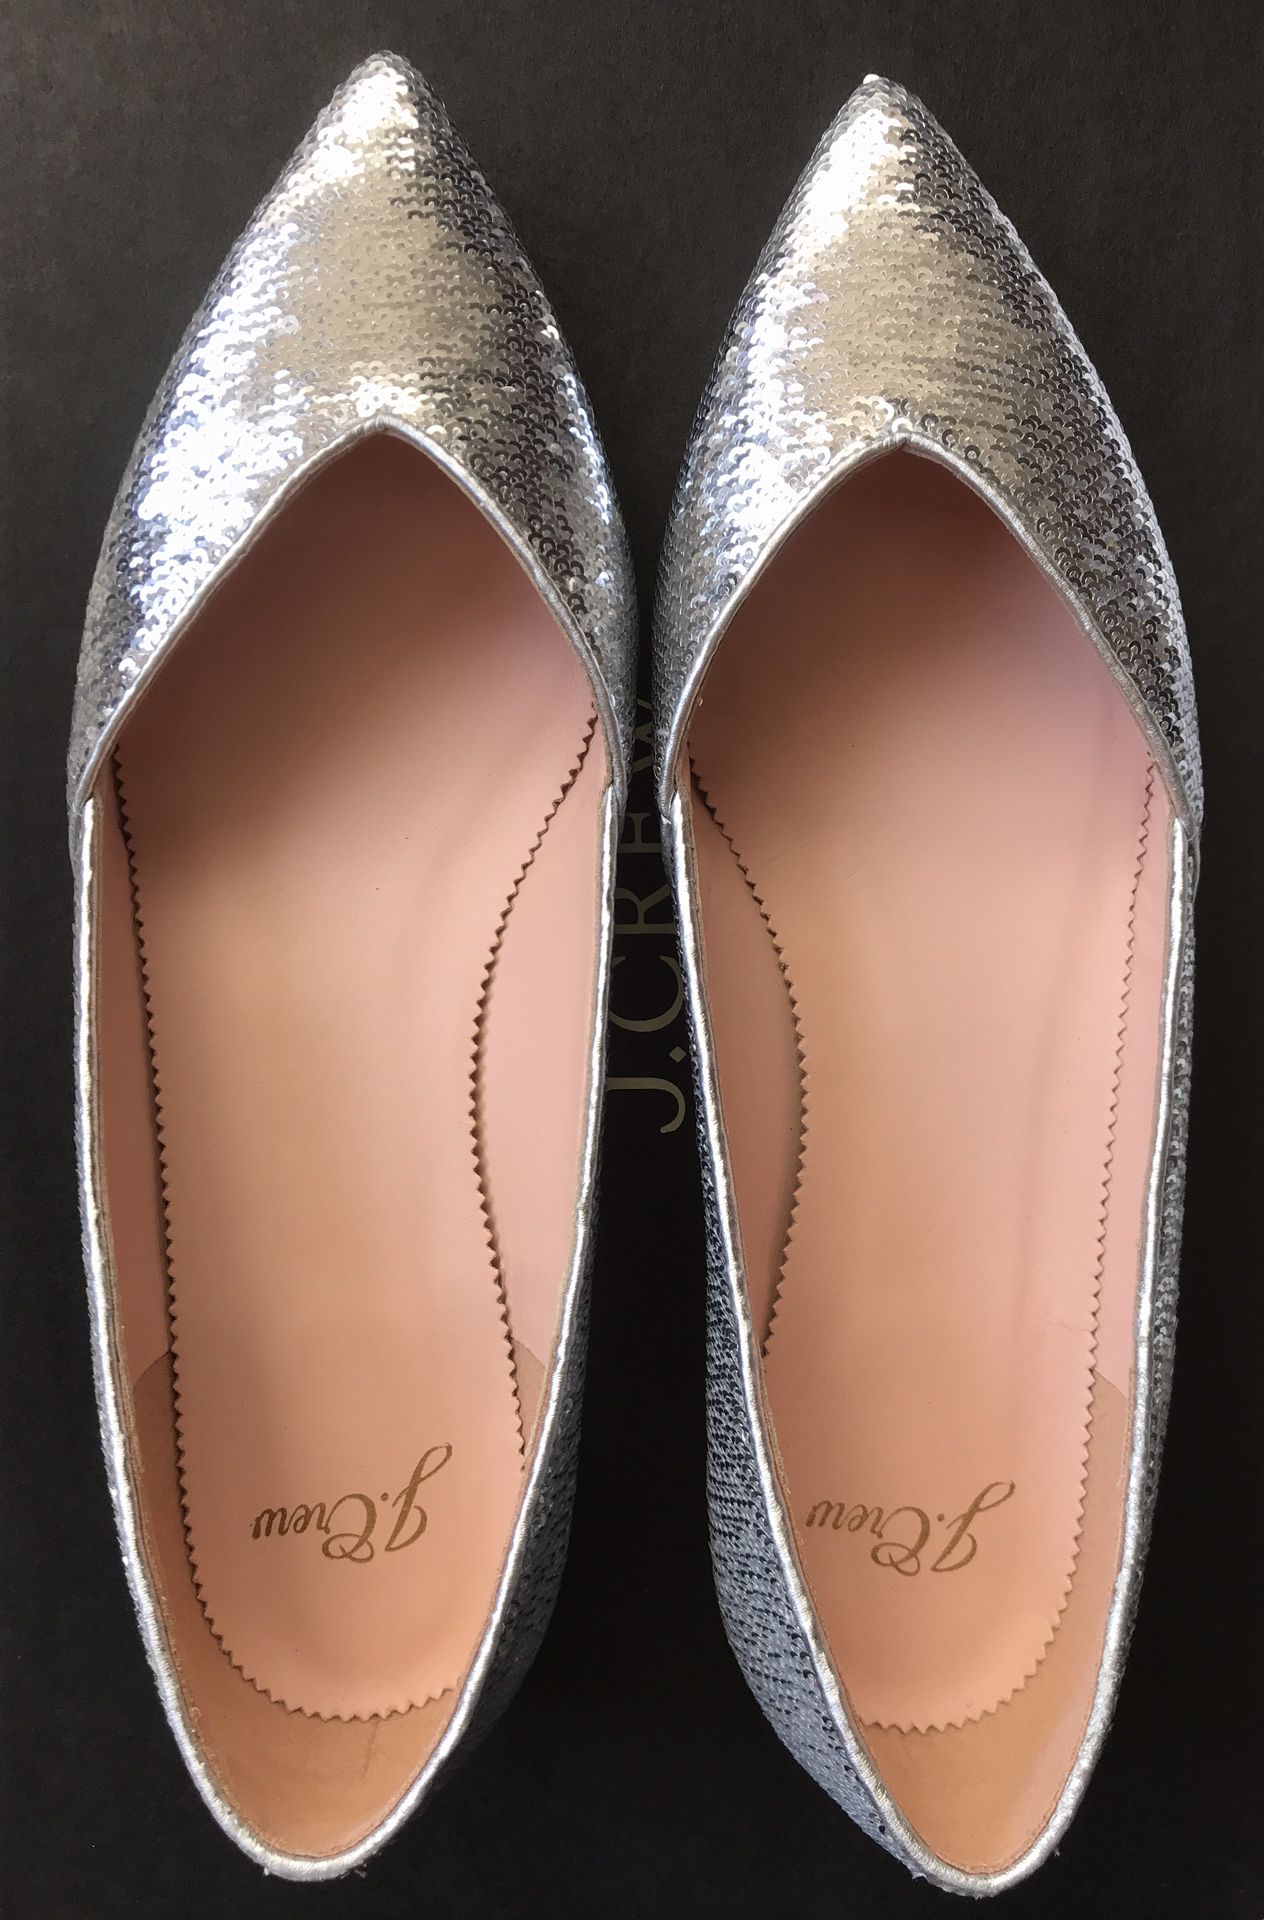 (NEW) (1 AVAILABLE) WOMEN’S J.CREW GWEN FLATS WITH GLITTERY SEQUINS - SIZE: 7 1/2 (MSRP: $158) 